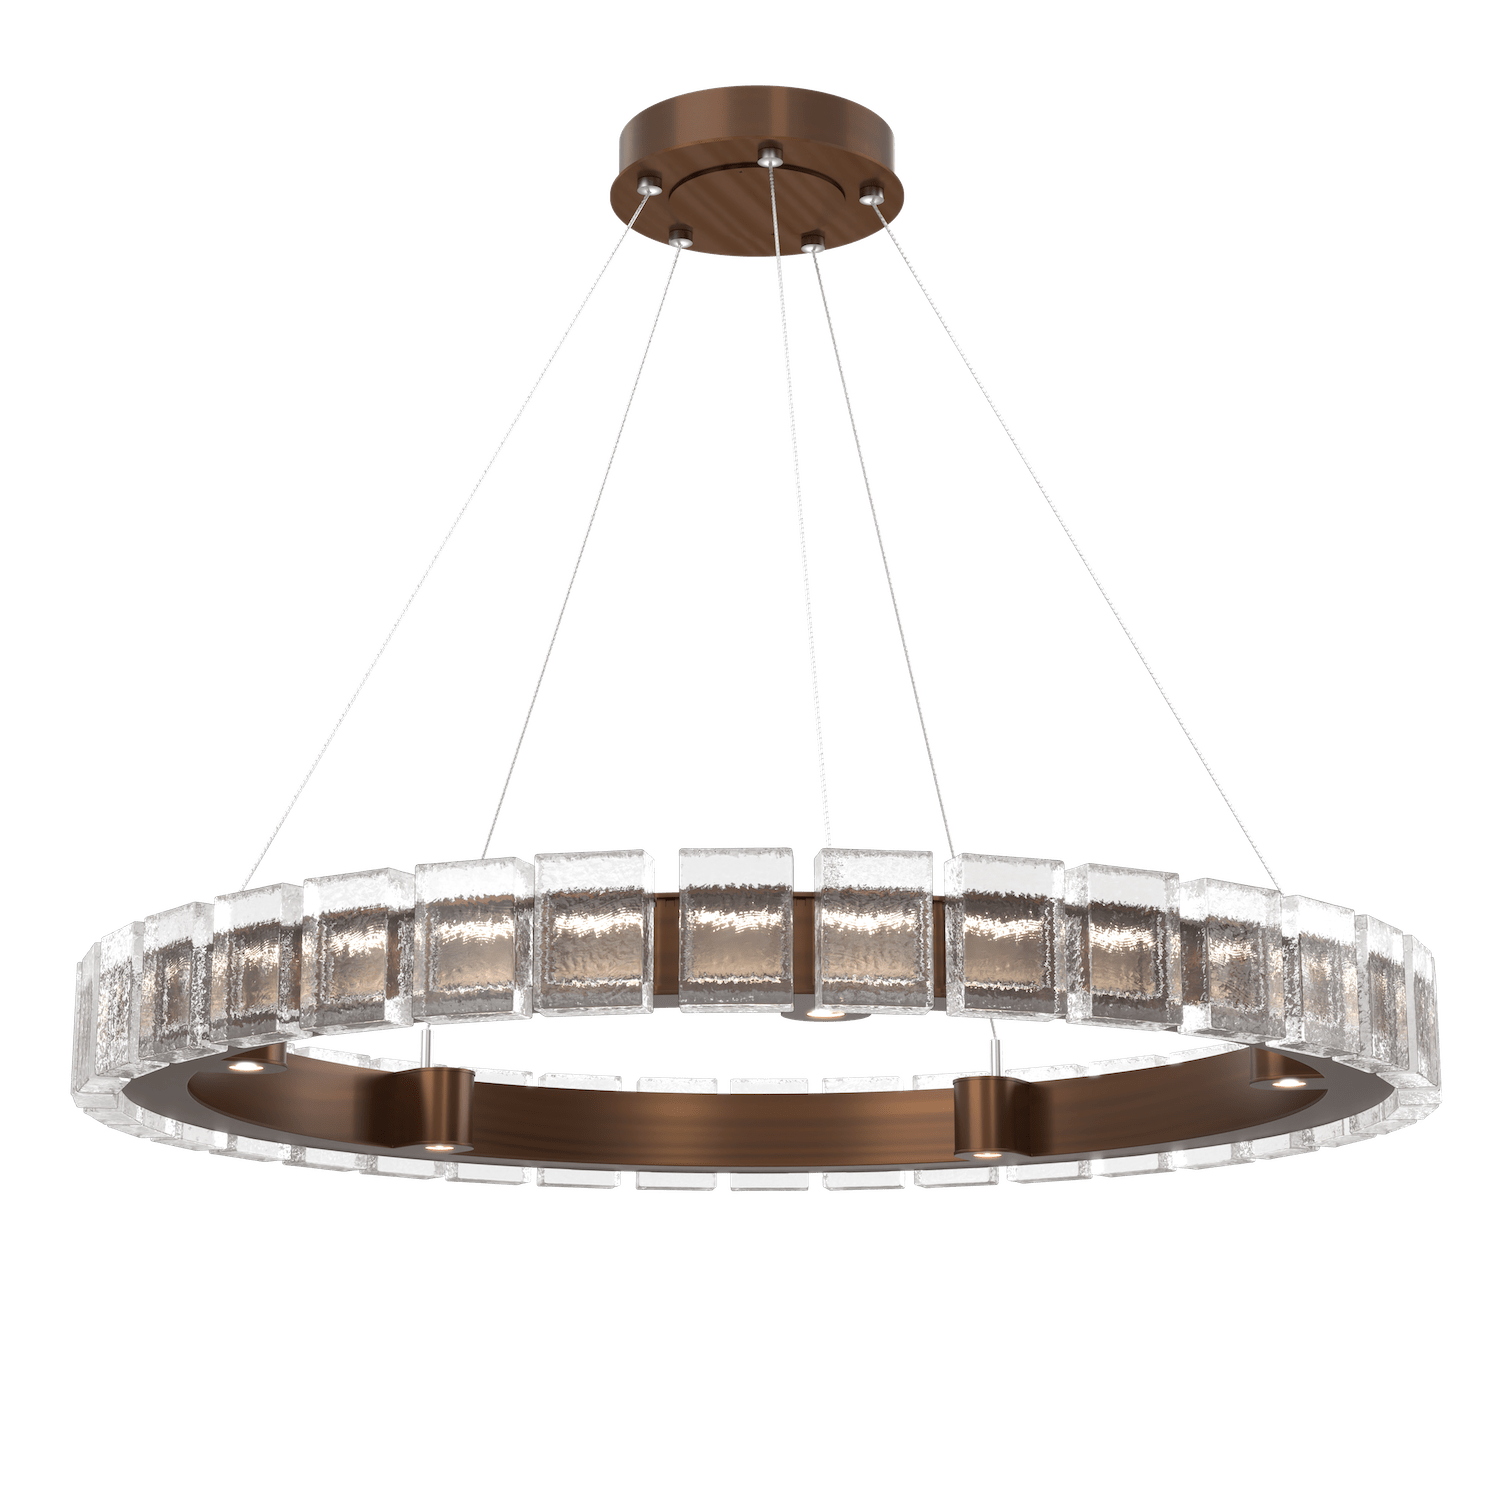 CHB0087-38-RB-TP-Hammerton-Studio-Tessera-38-inch-ring-chandelier-with-oil-rubbed-bronze-finish-and-clear-pave-cast-glass-shade-and-LED-lamping